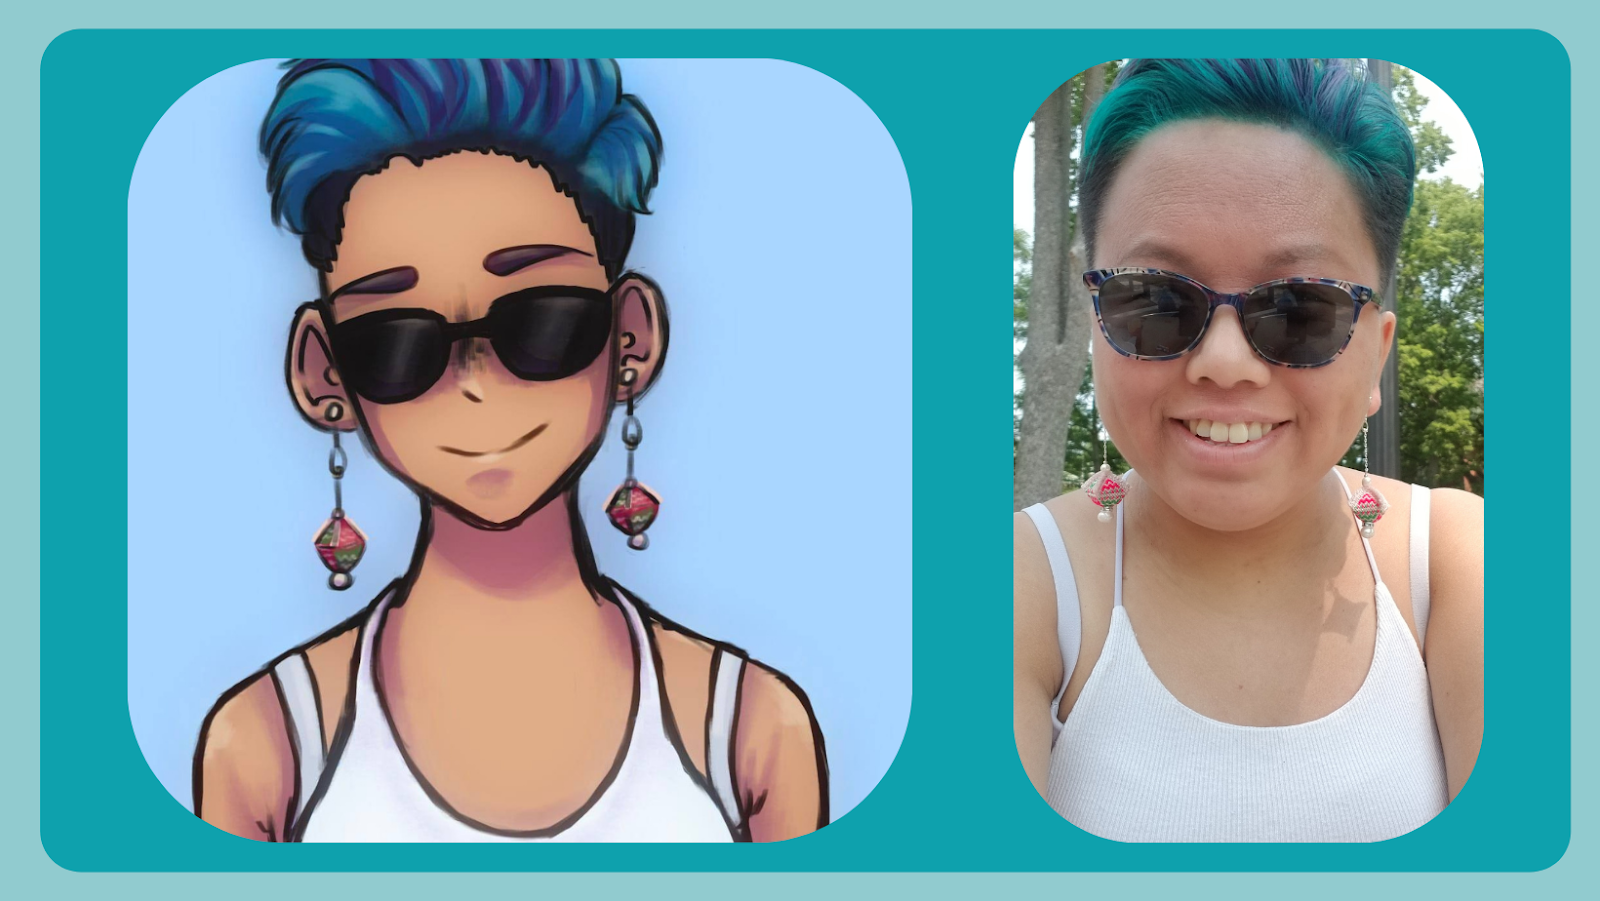 Picture on the right is Nancy in short teal and black hair with sunglasses and Hmong dangling earrings. Picture on the left is a drawing of the picture on the right, drawn by Nancy's sibling.